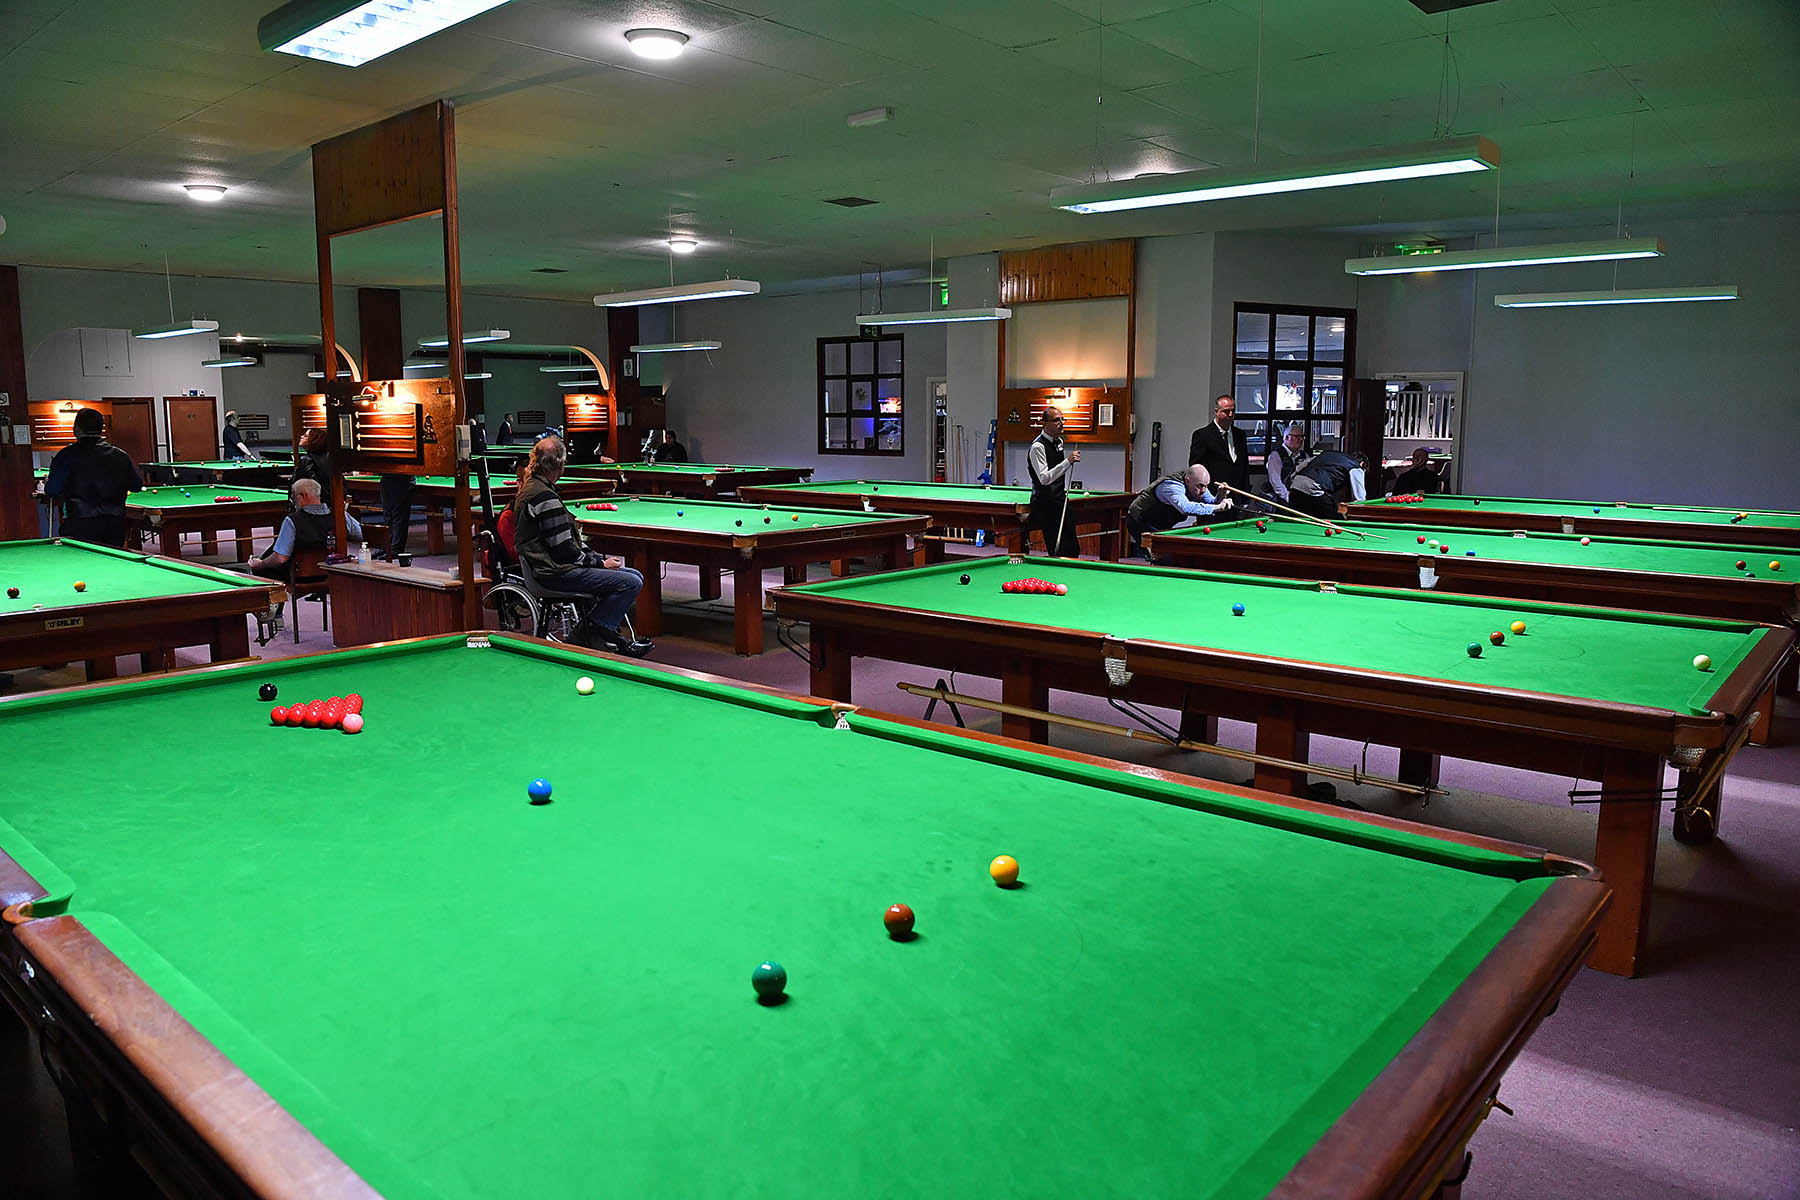 Snooker arena